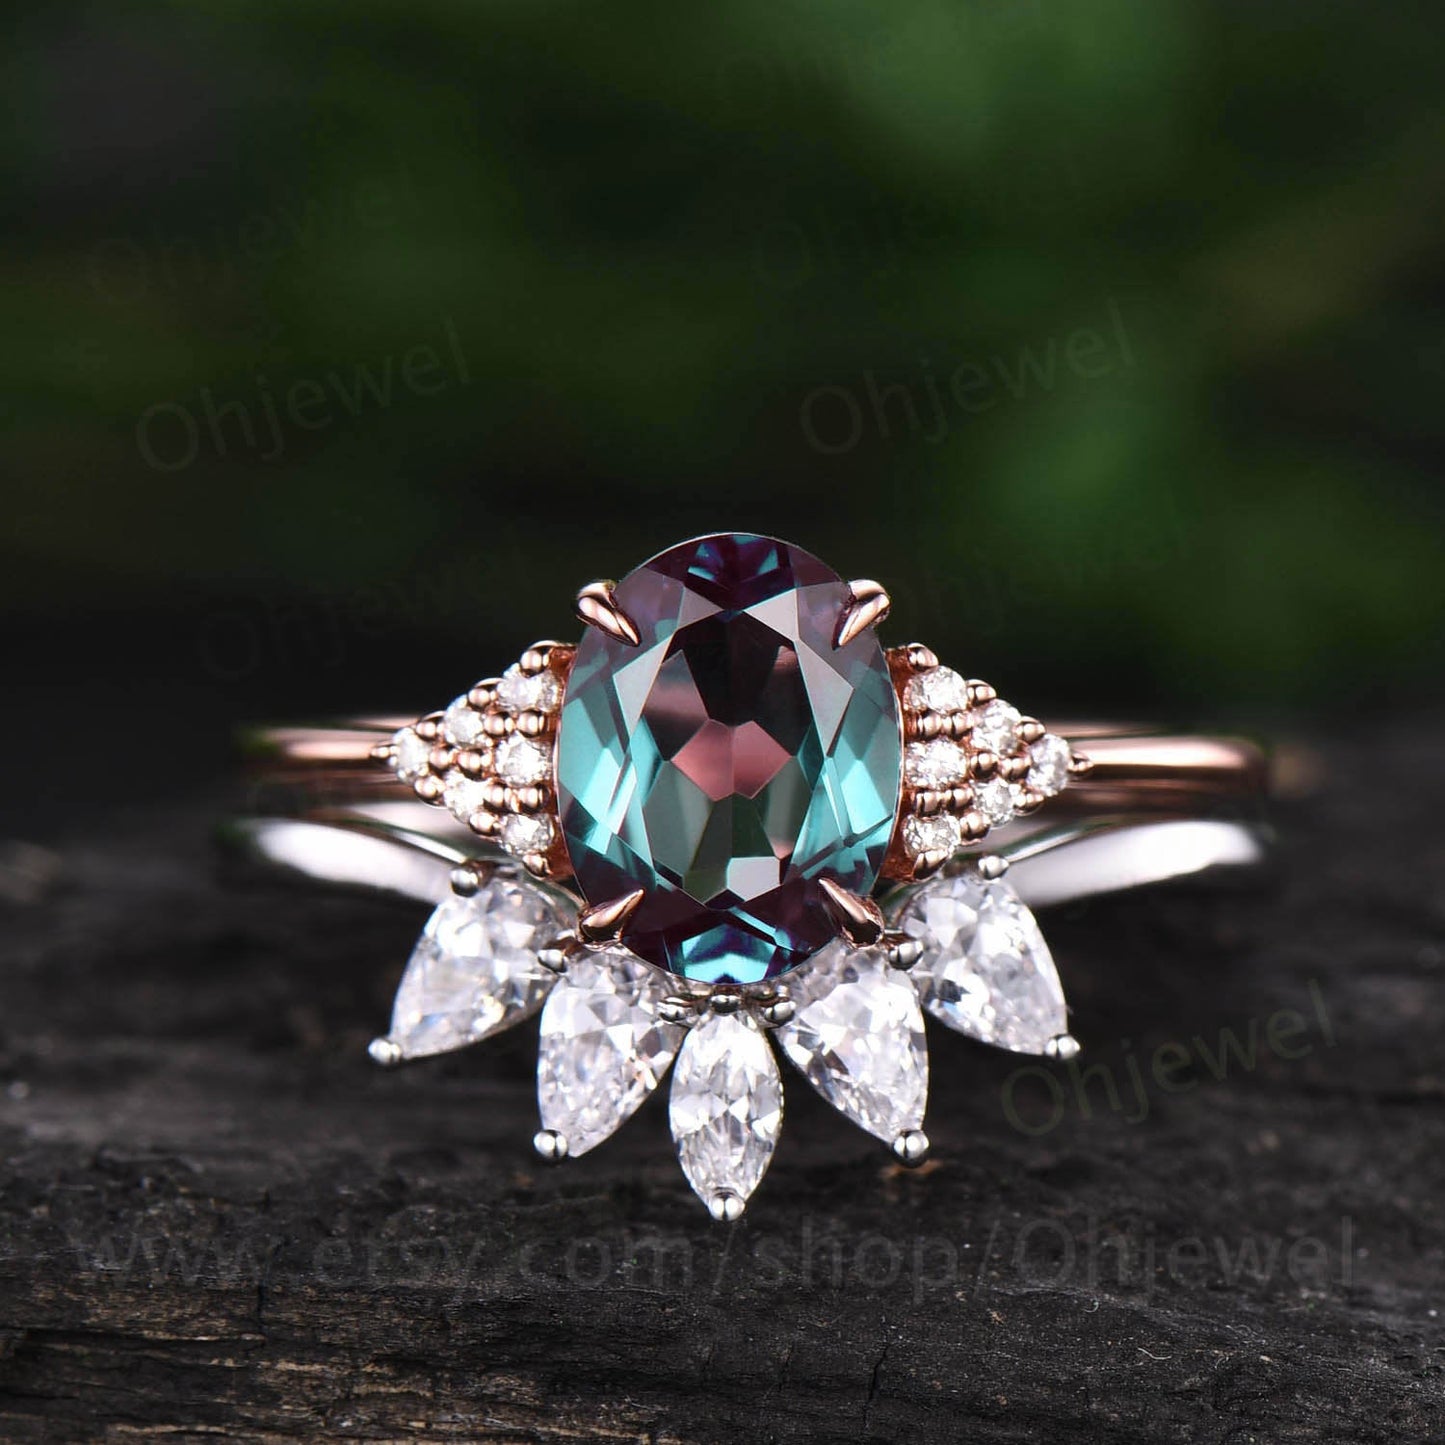 Alexandrite engagement ring five stone Alexandrite ring set vintage rose gold for women marquise pear shaped moissanite wedding ring band